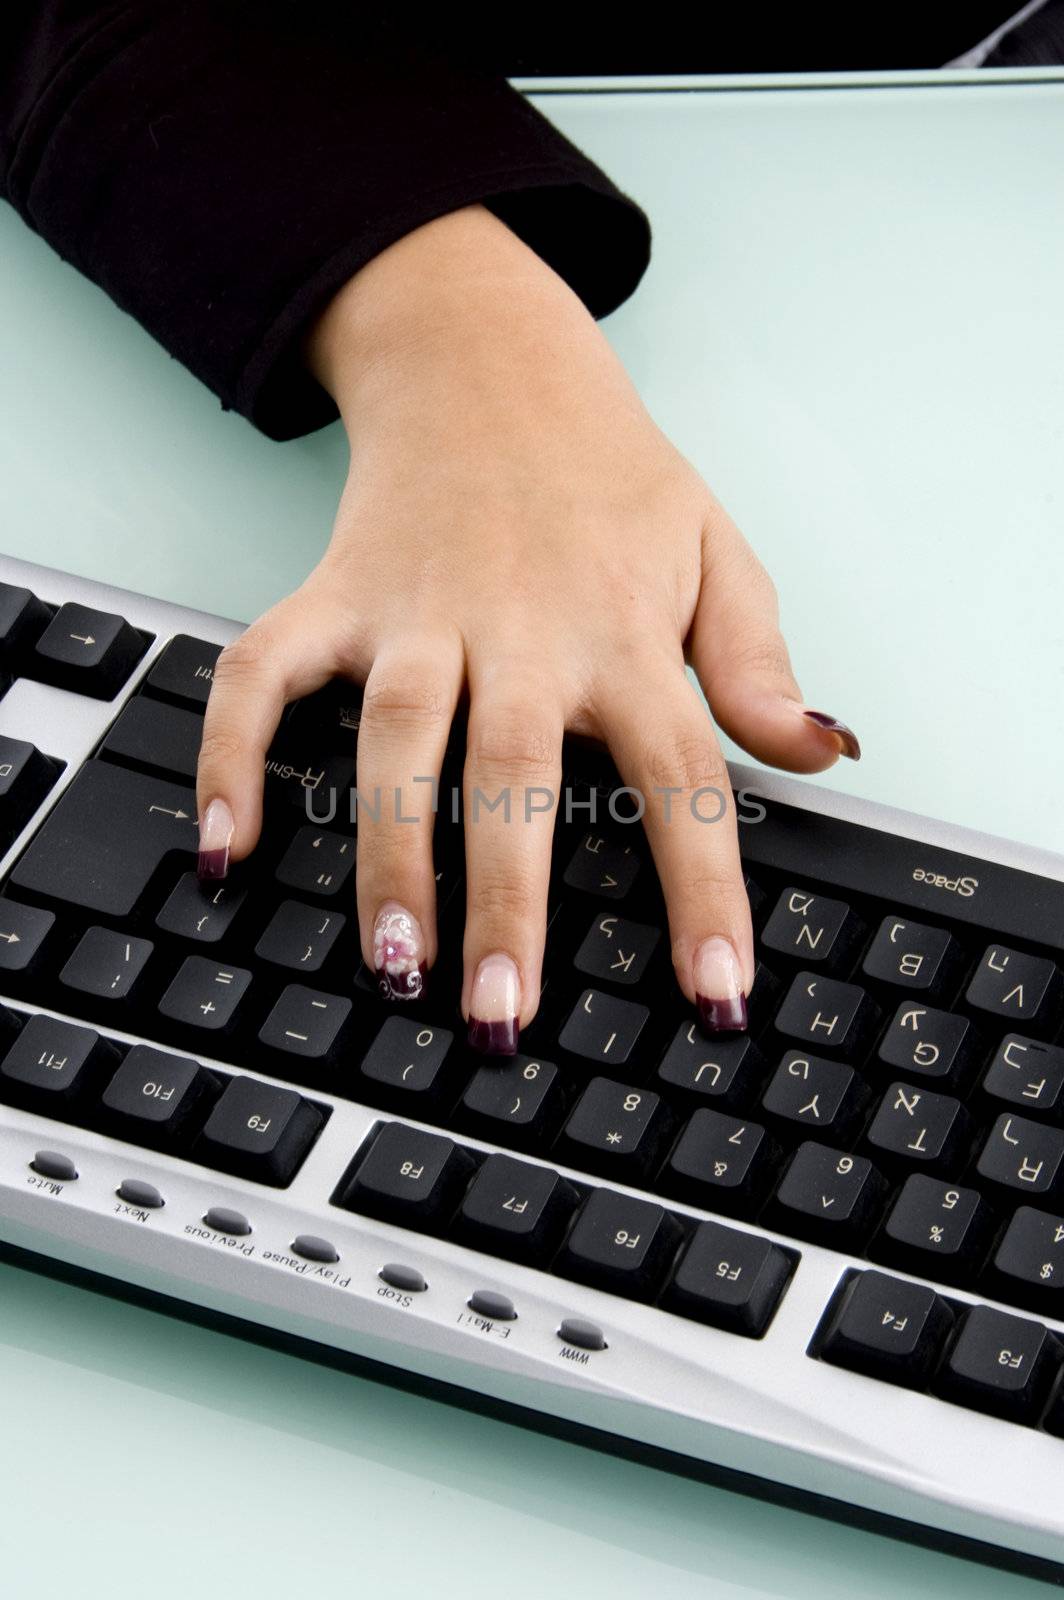 hand on keyboard against white background